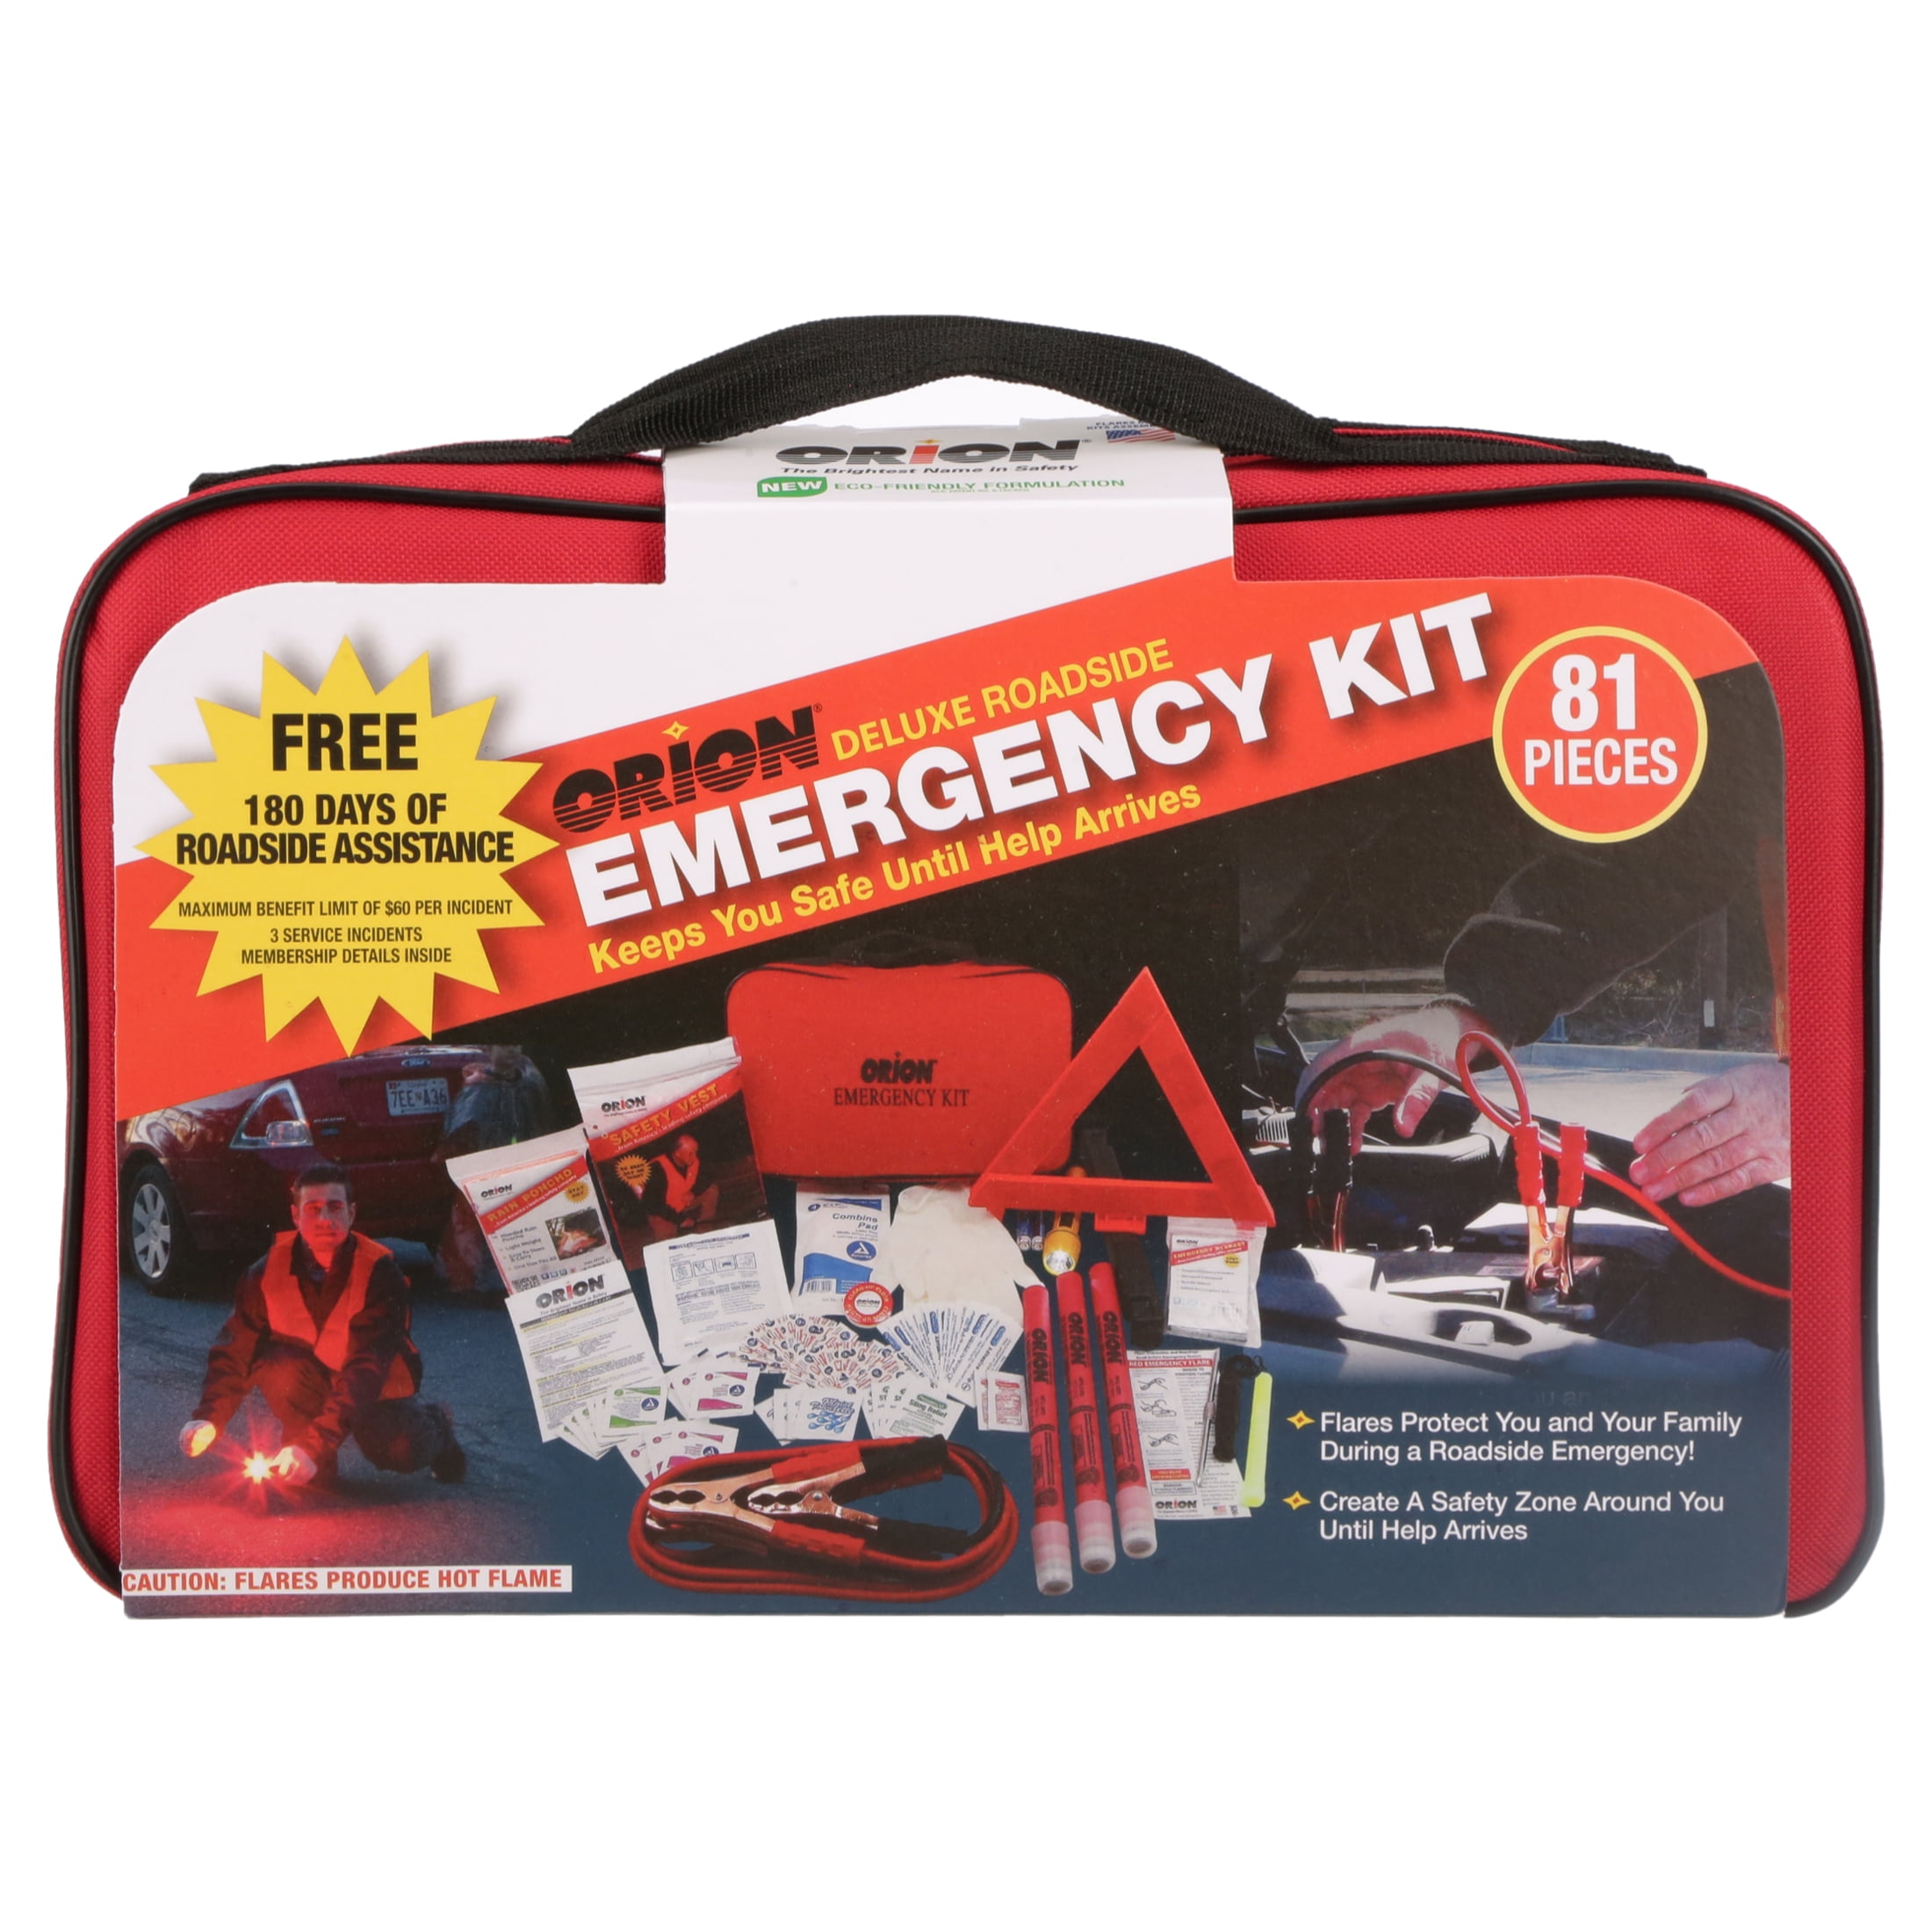 46 Piece Set Includes First Aid Products From Jumper Cables to Emergency Blankets Signaling Orion Roadside Car Emergency Safety Kit Emergency Lighting Survival Products & Personal Accessories 